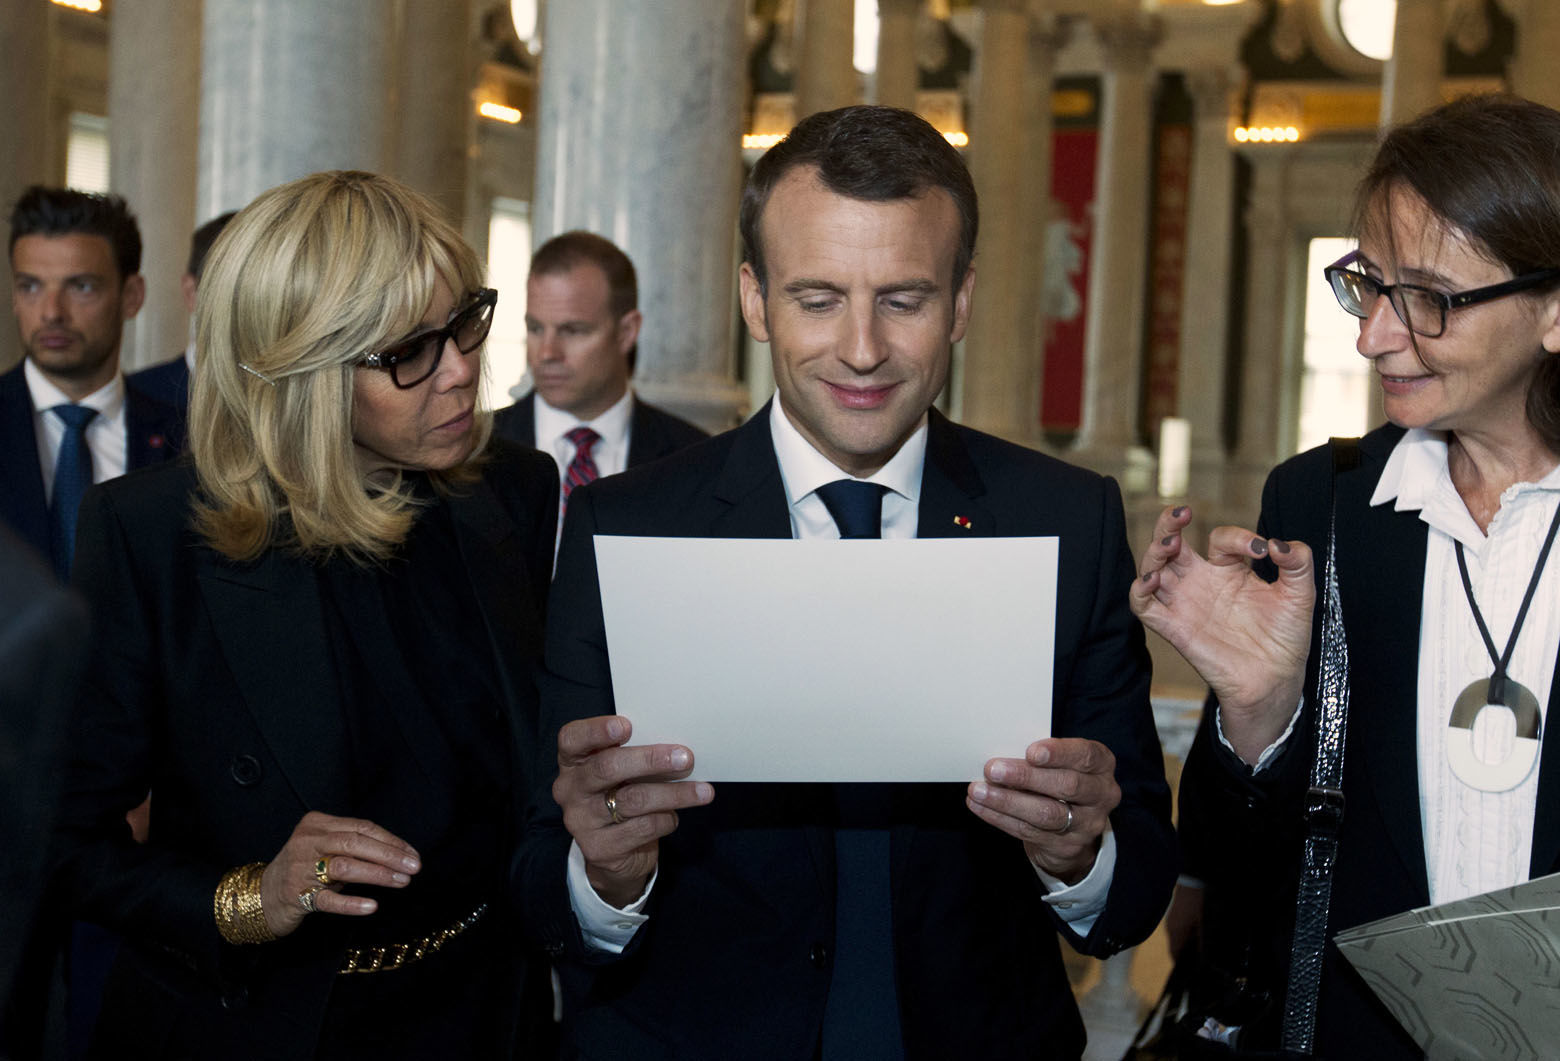 French President Emmanuel Macron and his wife Brigitte read a document during their visit to the Library of Congress on Wednesday, April 25, 2018, in Washington. (AP Photo/Jose Luis Magana)